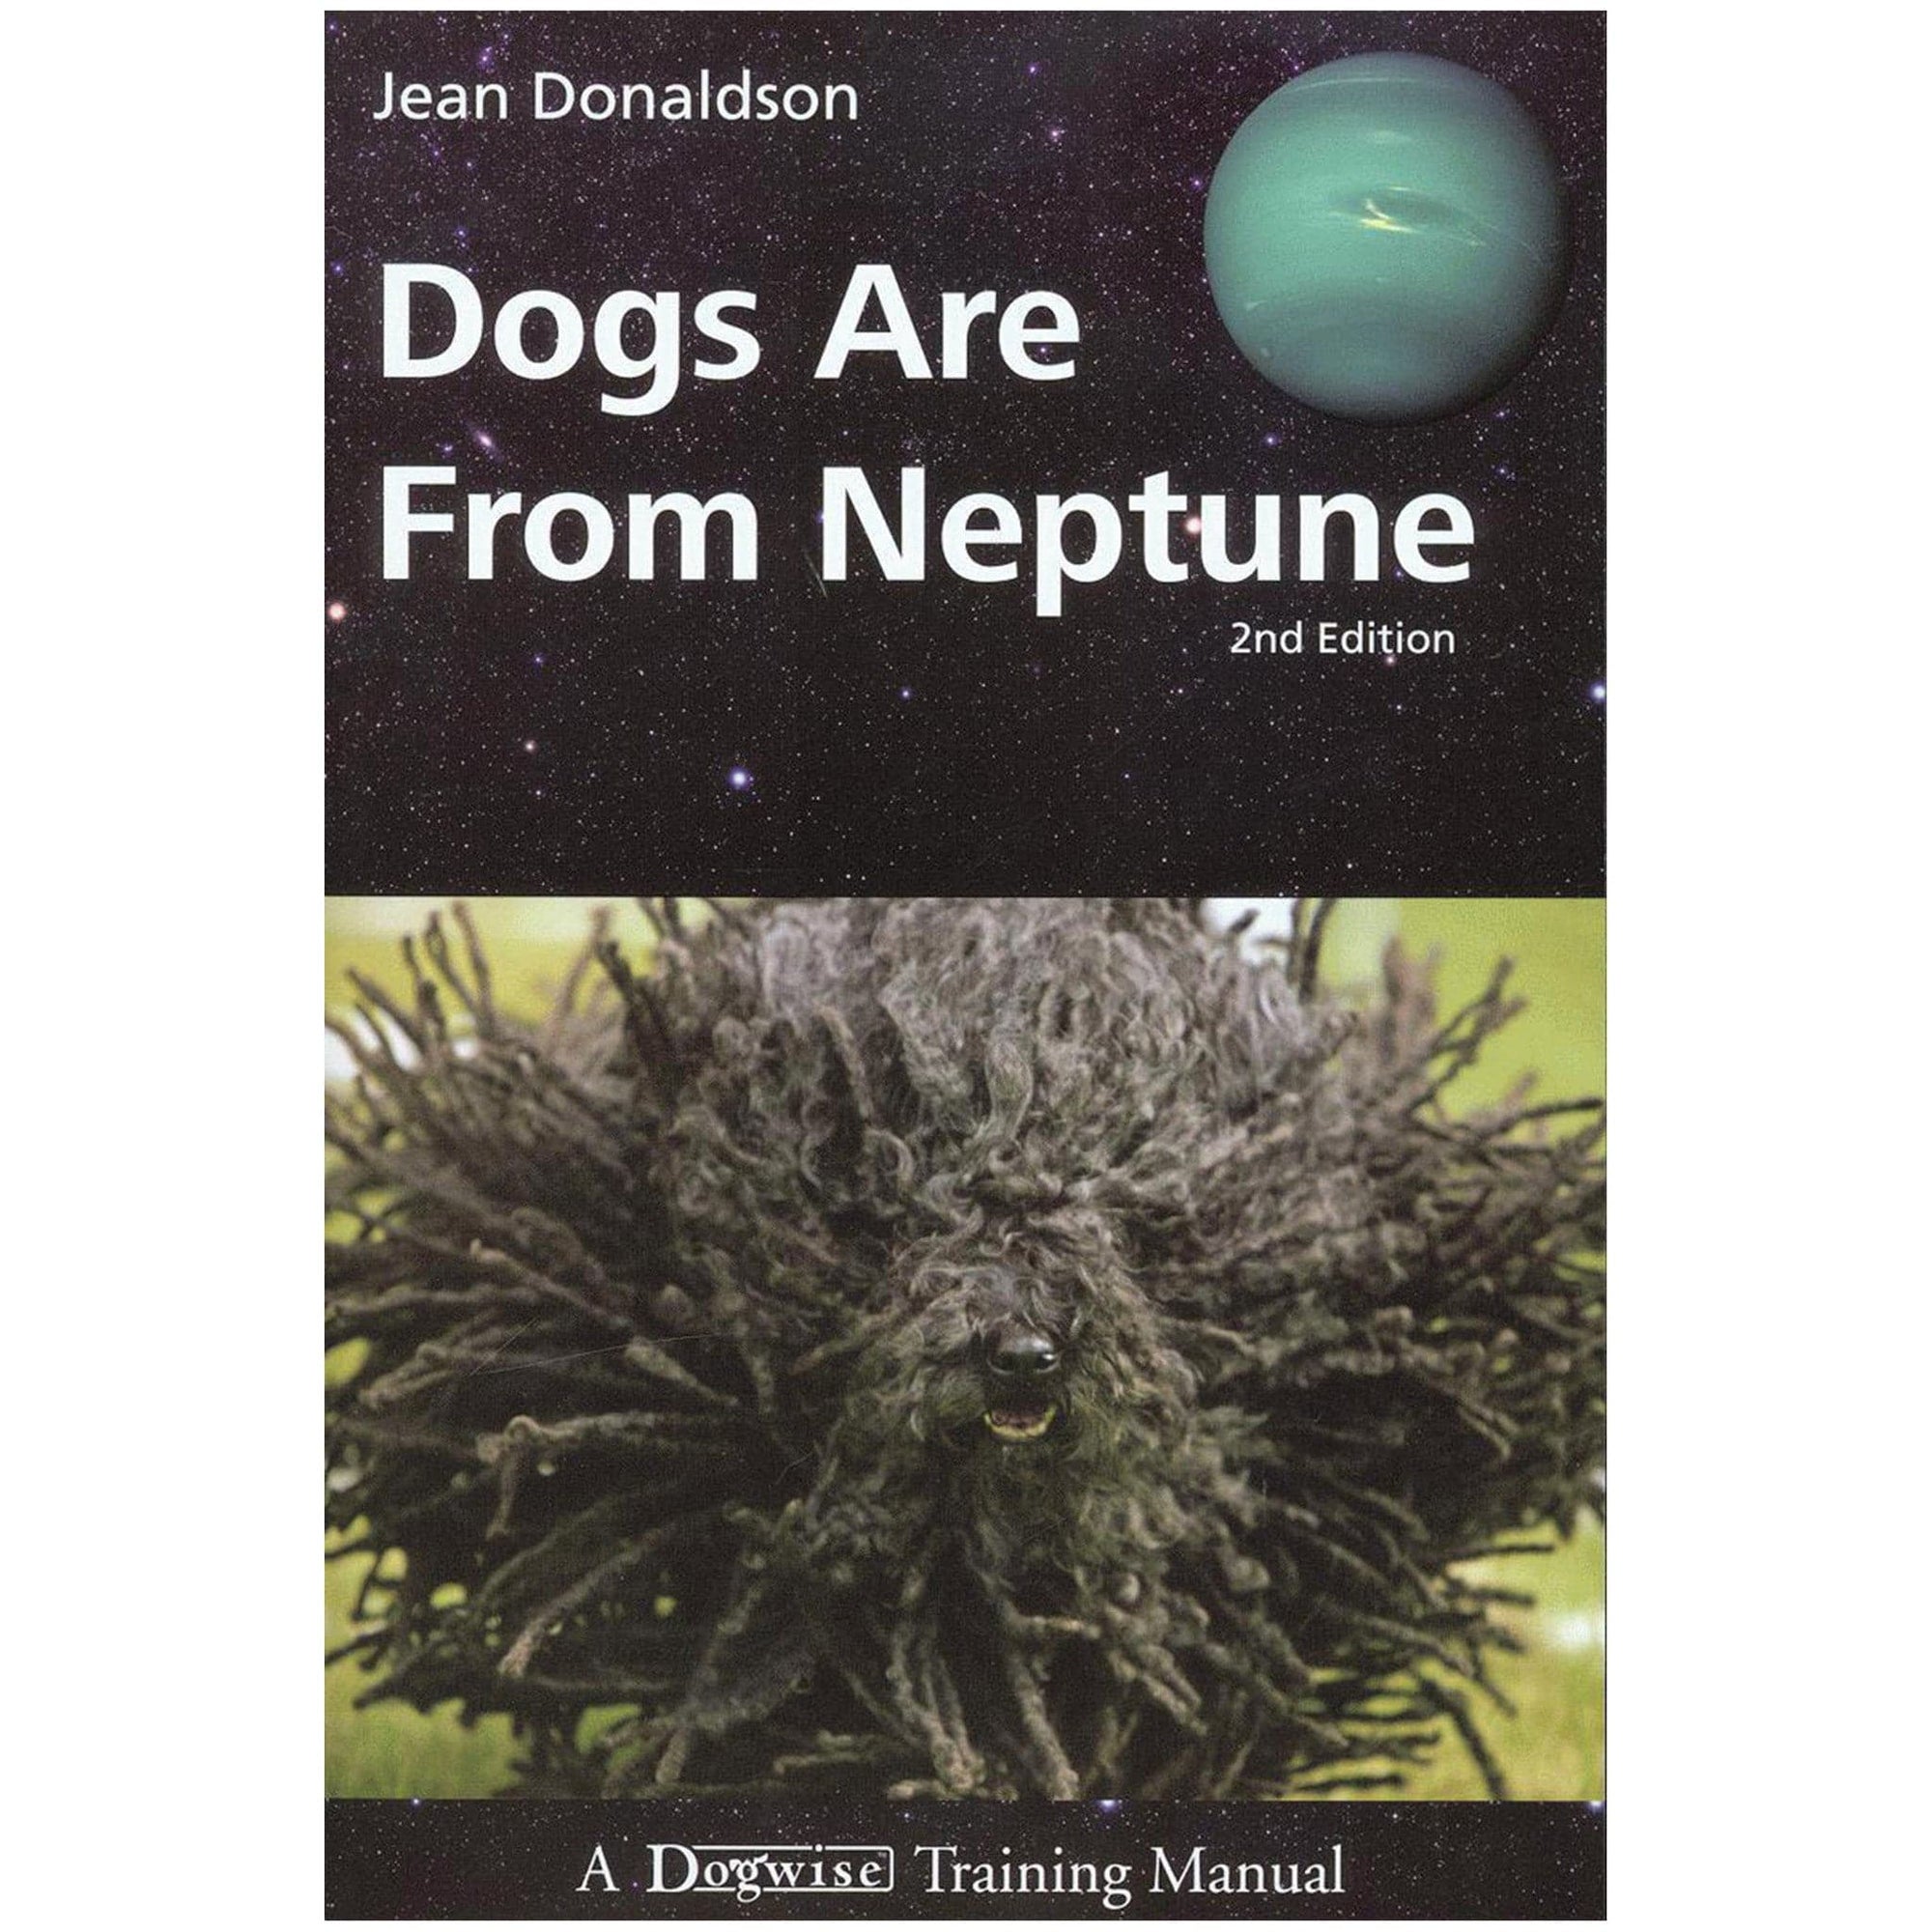 E-BOOK Dogs are From Neptune 2nd Edition by Jean Donaldson